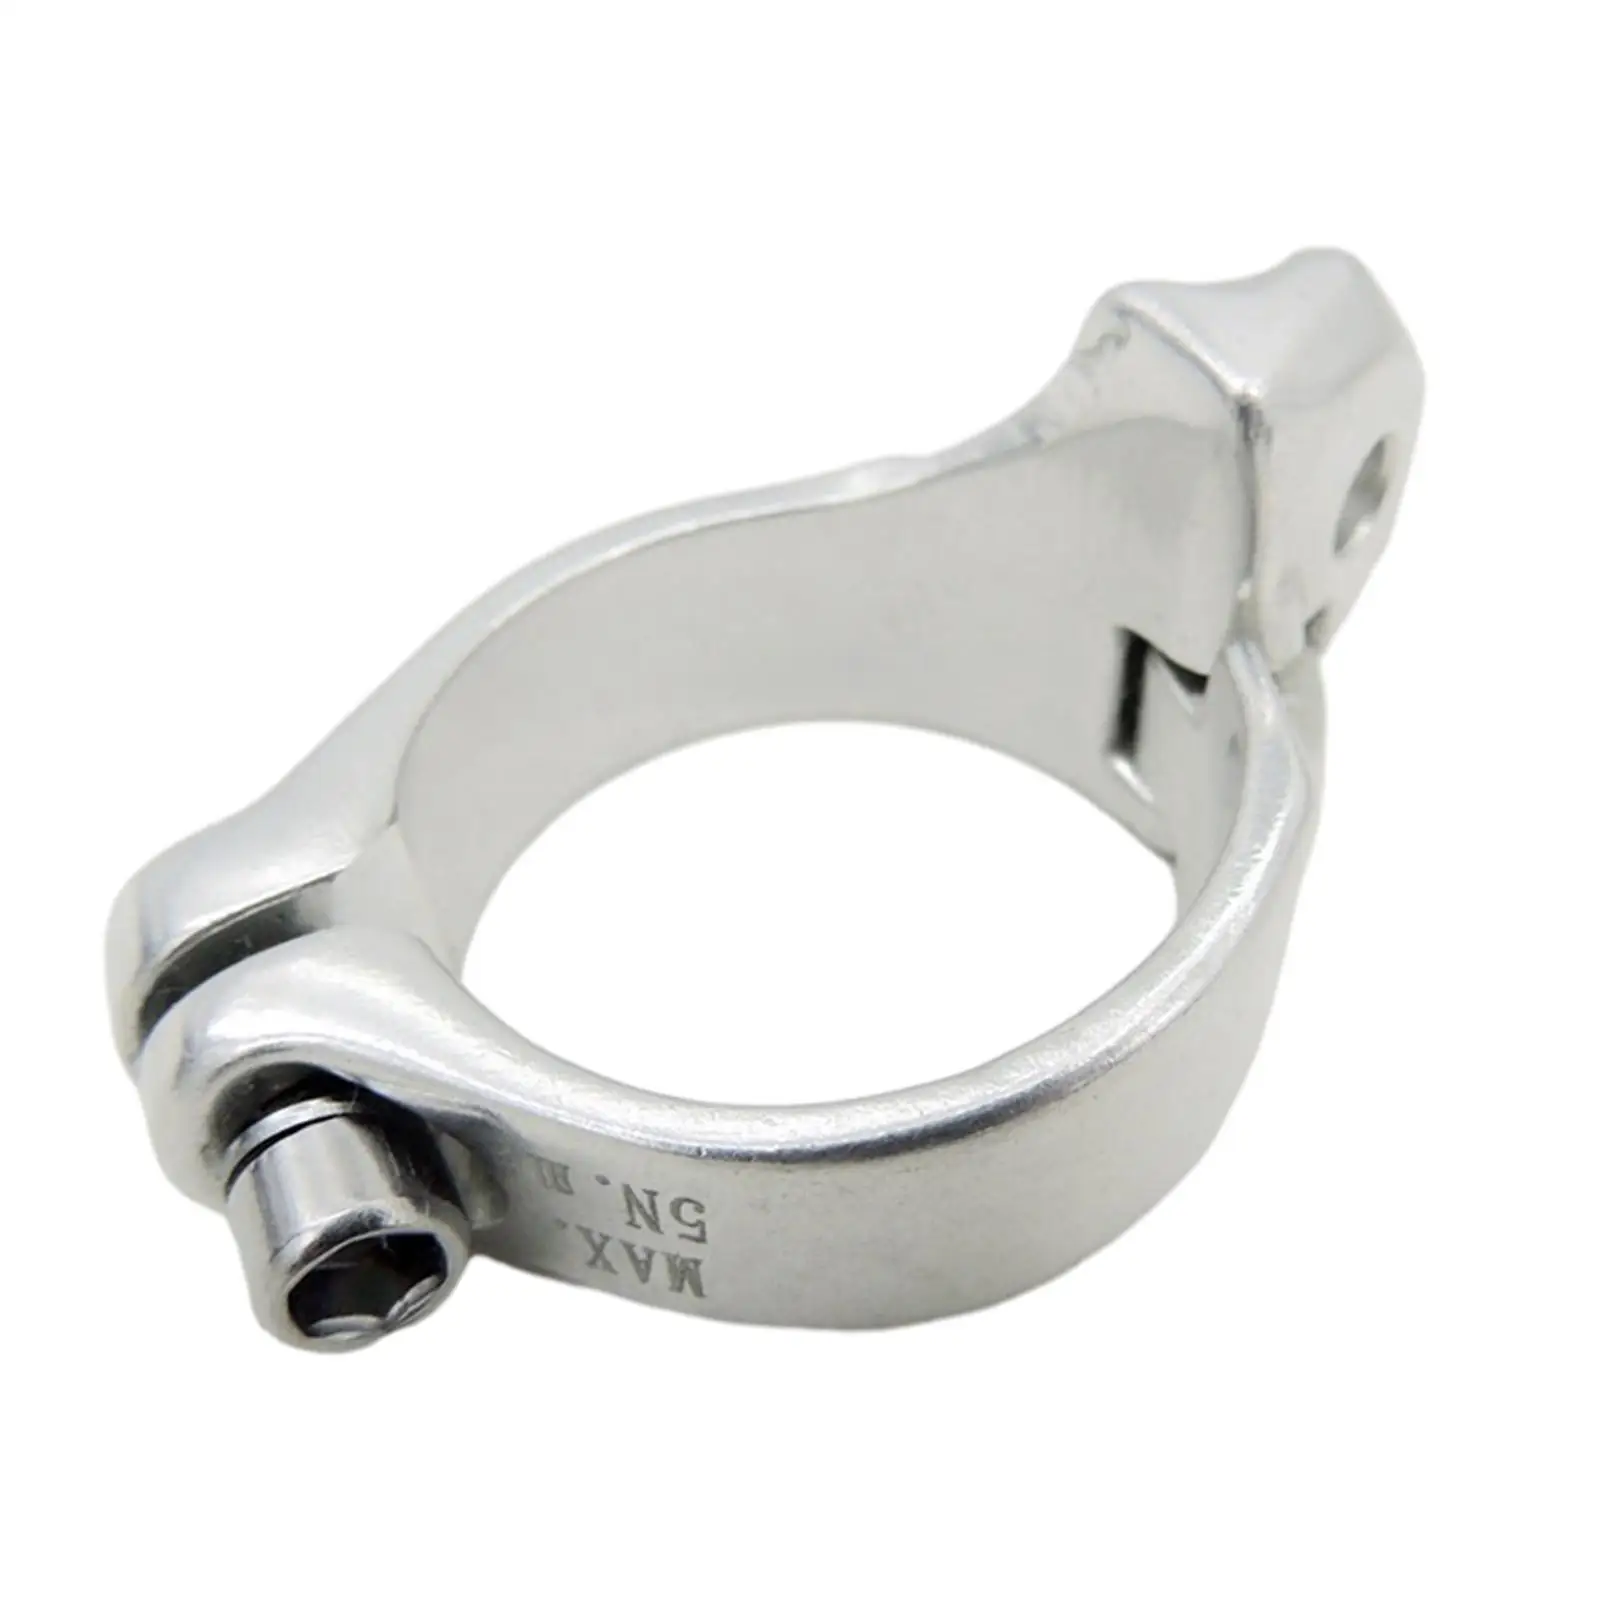 Bicycle Front Derailleur Clamp Bike Tube Clip Braze on Adapter Clamp Aluminium Alloy Bike Derailleur Clamp 34.9mm for Road Bike